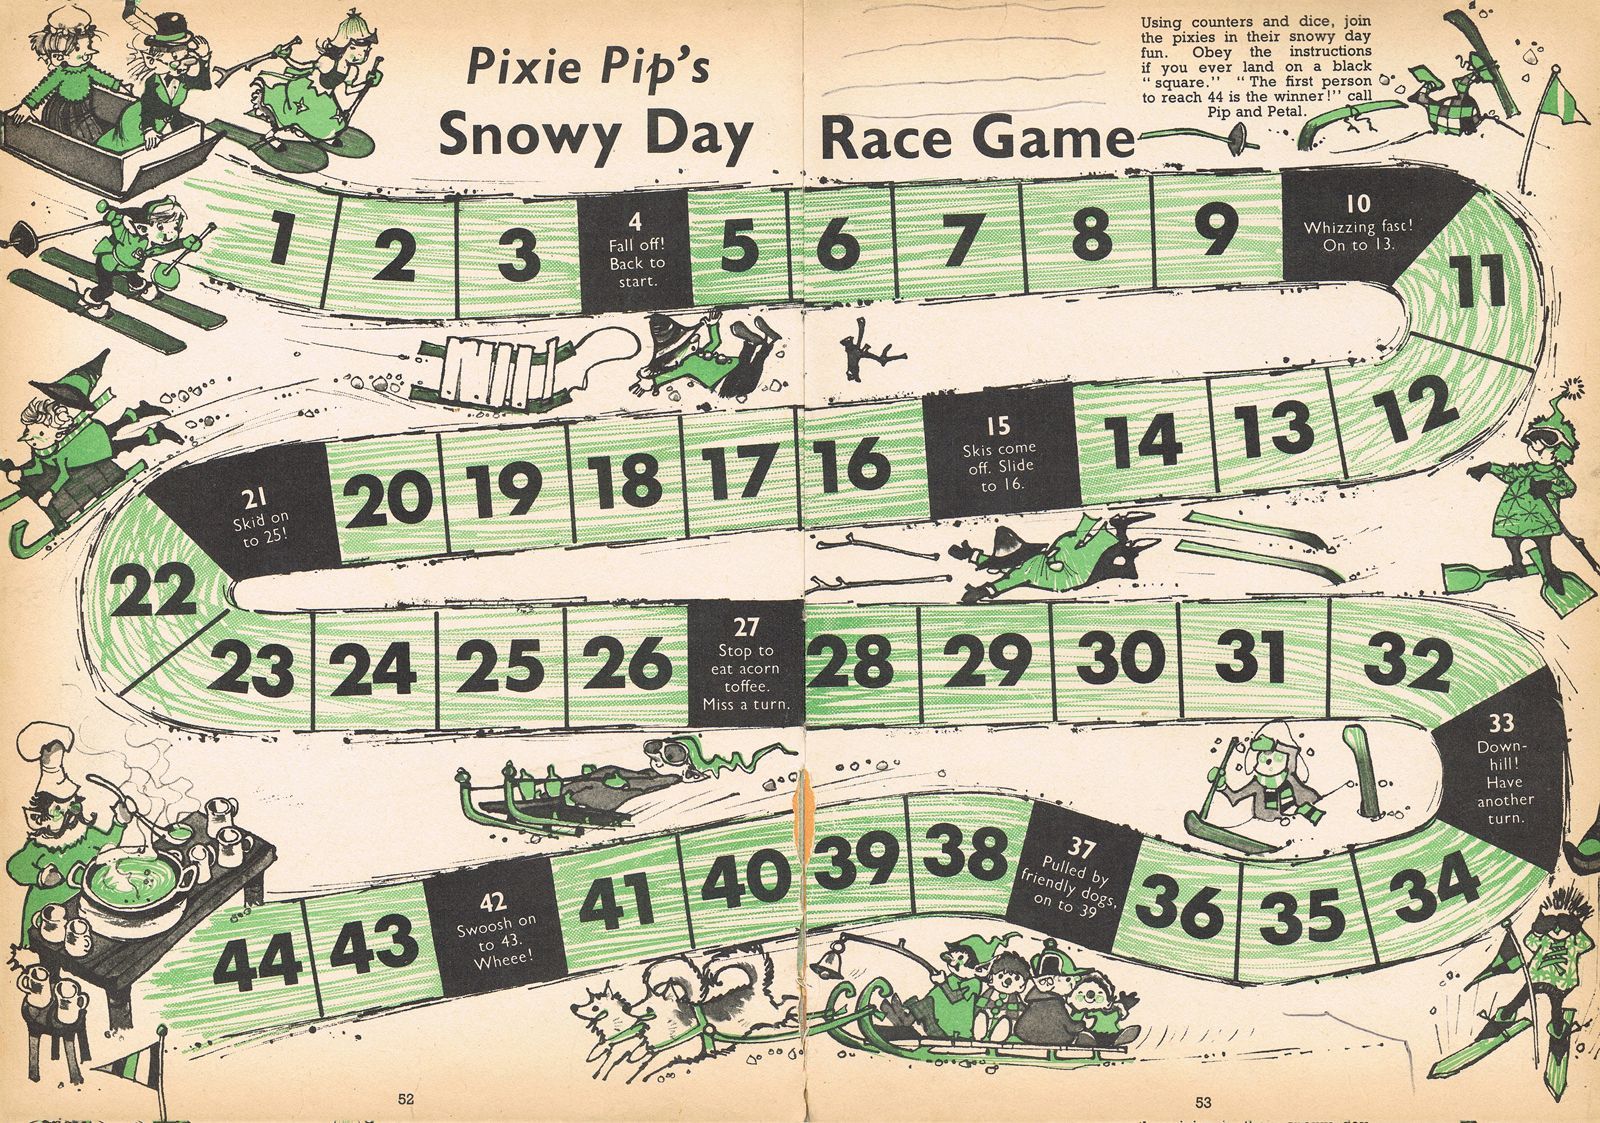 Pixie Pip's Snowy Day Race Game